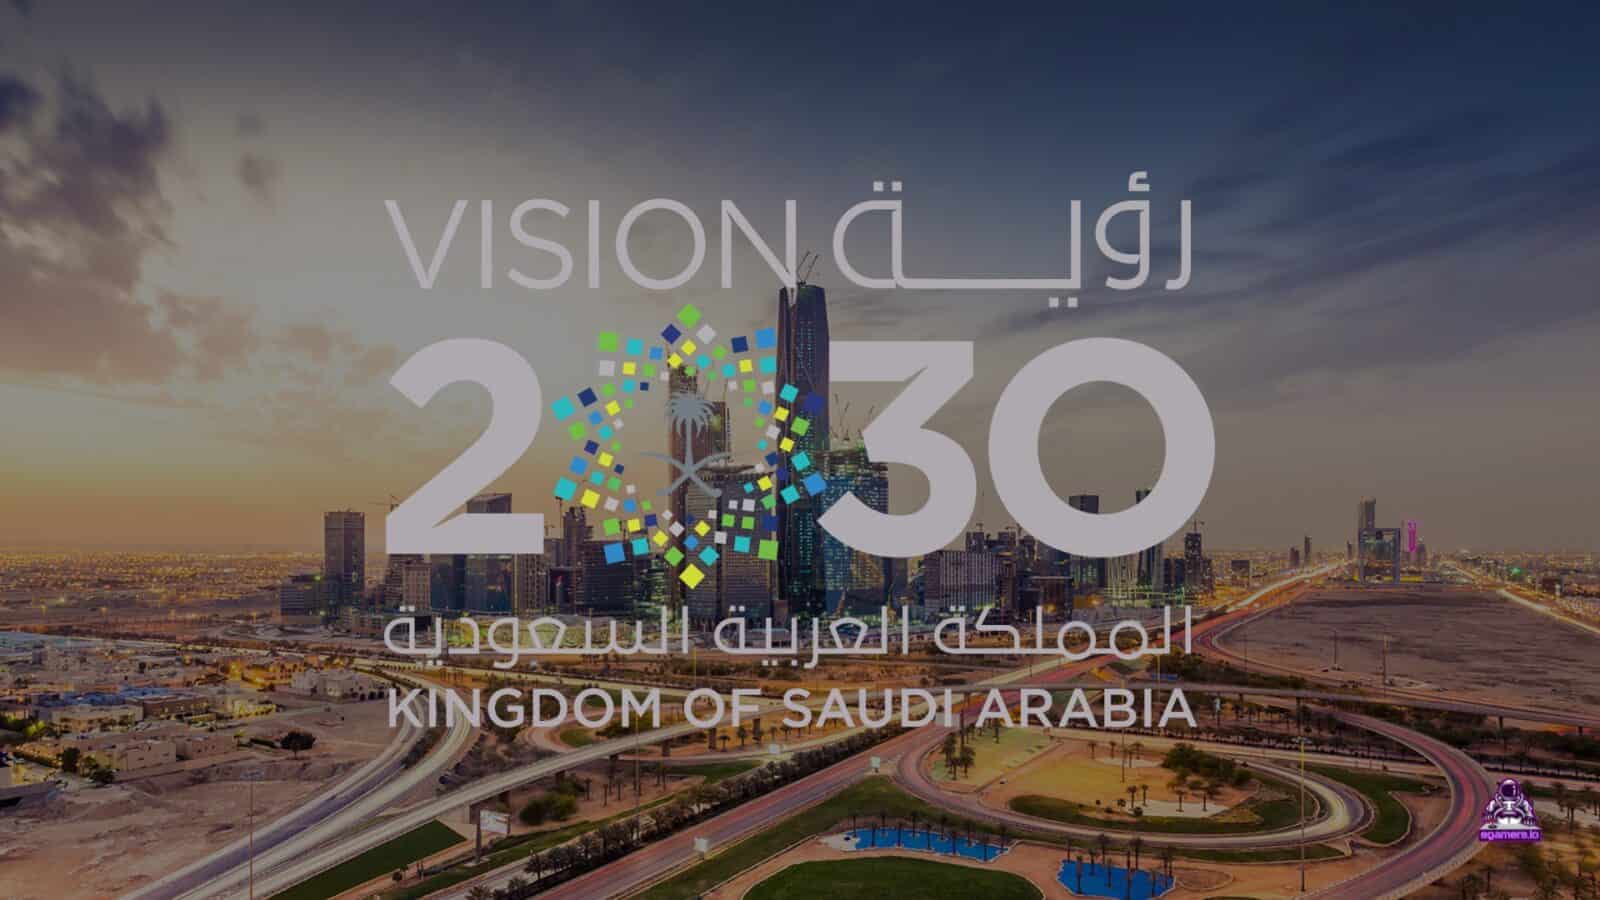 Saudi Arabia Expands Economy with Web3 and Gaming Focus